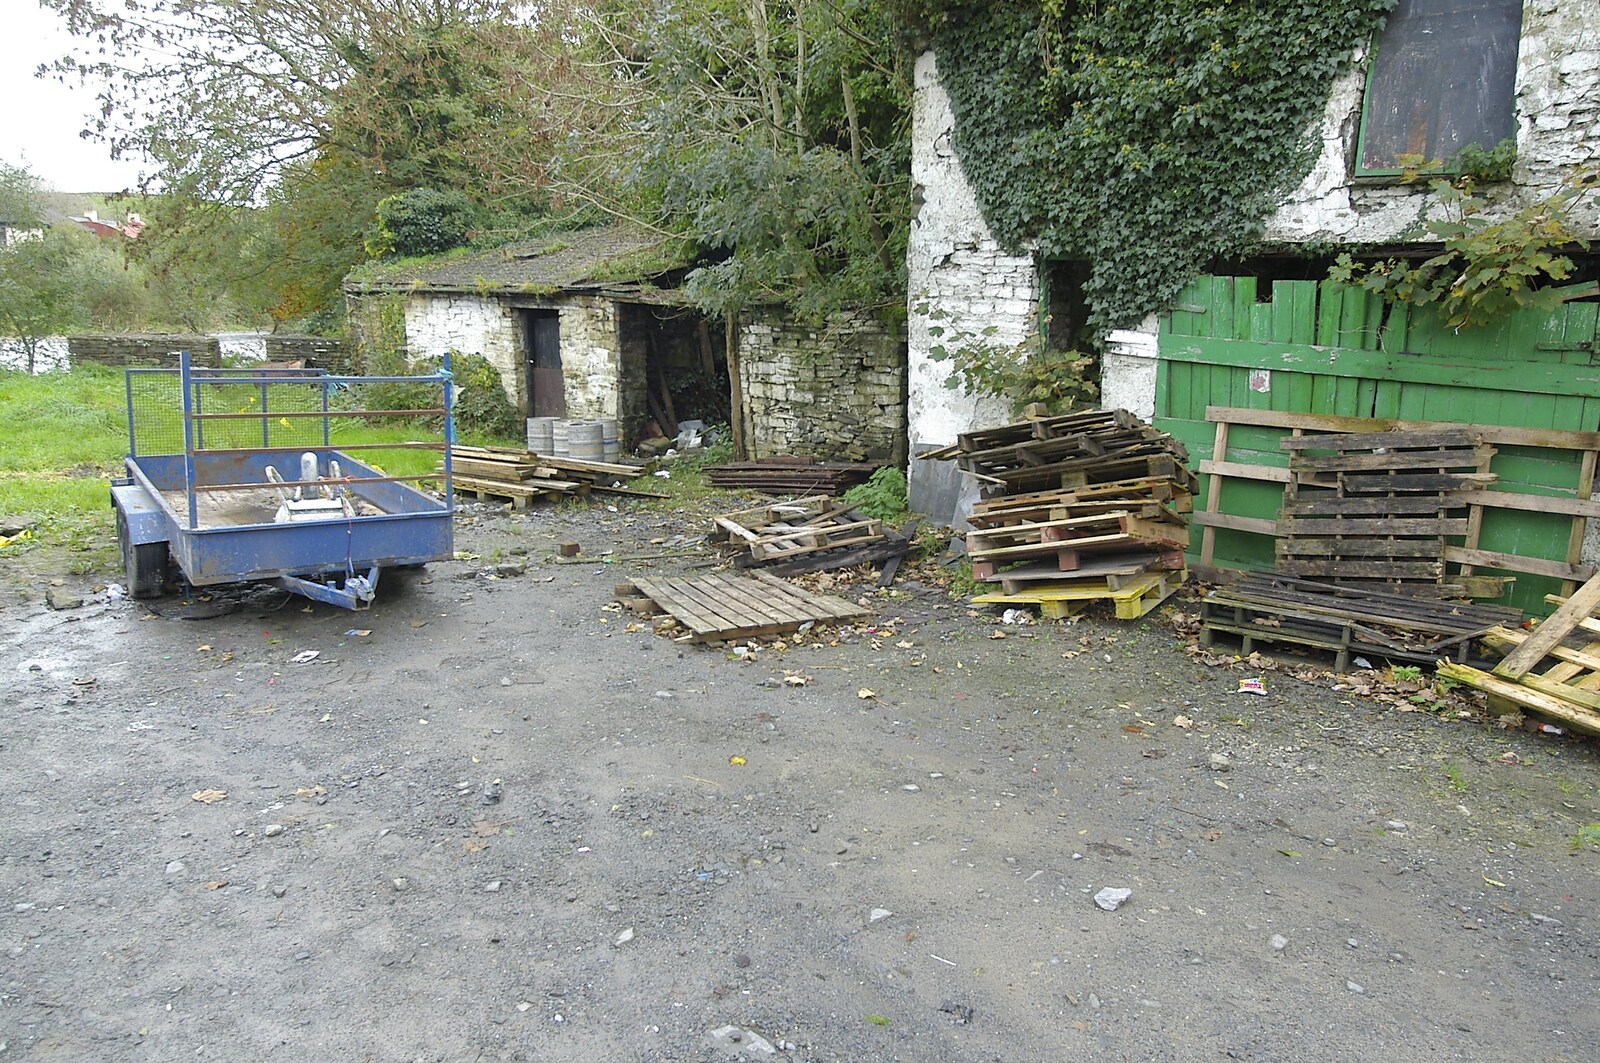 Discarded pallets from Corofin, Ennistymon and The Burran, County Clare, Western Ireland - 27th October 2006